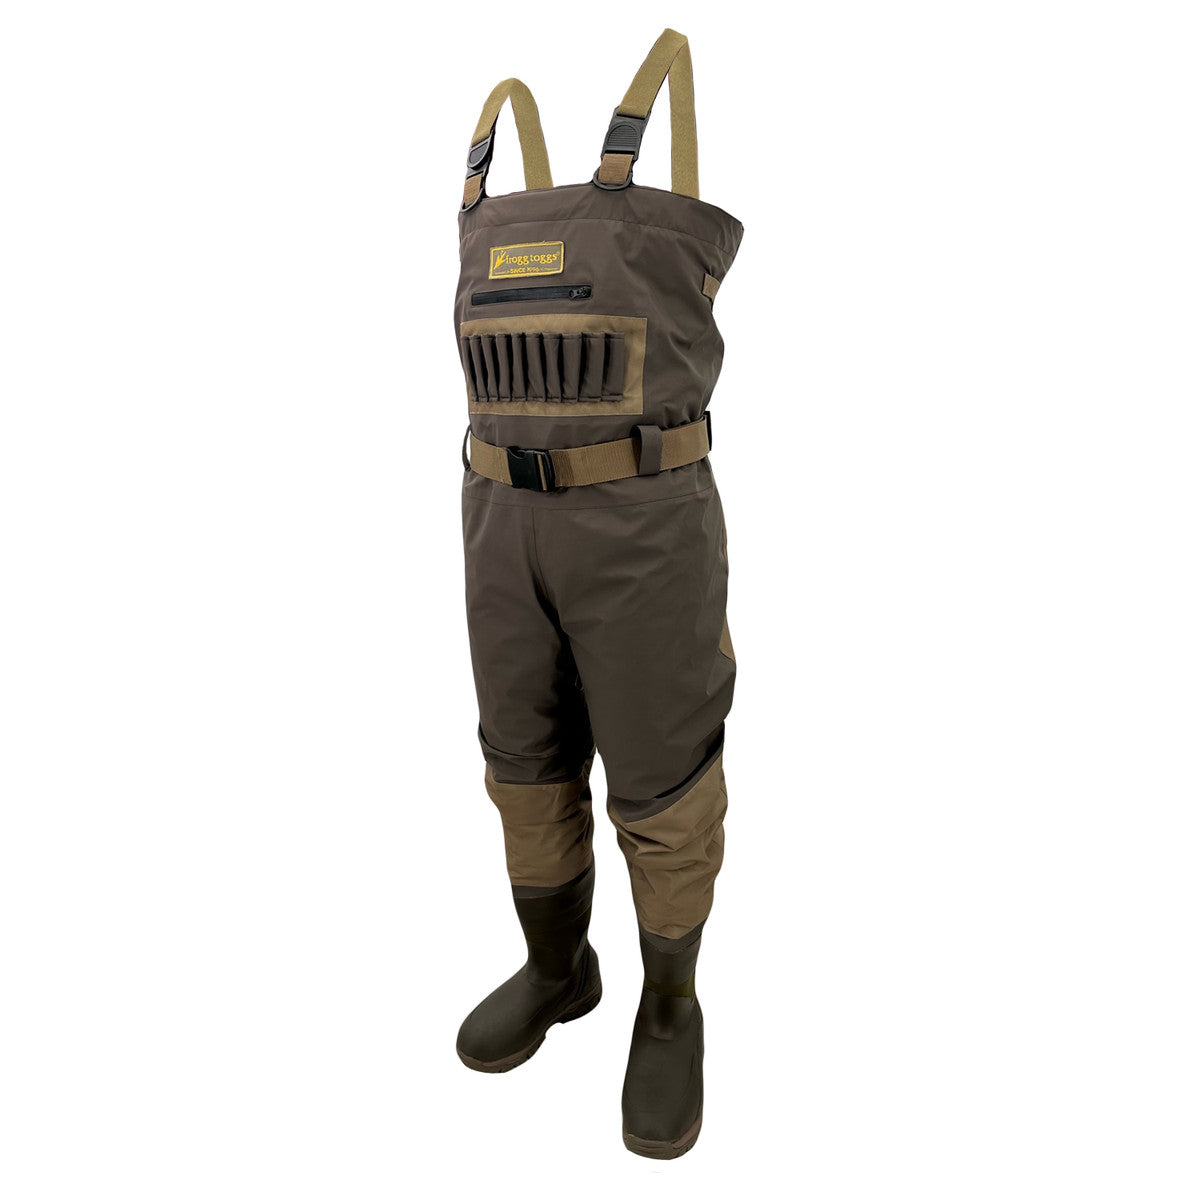 Frogg Toggs Grand Refuge 3.0 Bootfoot Chest Waders-Footwear-Brown-9-Kevin's Fine Outdoor Gear & Apparel